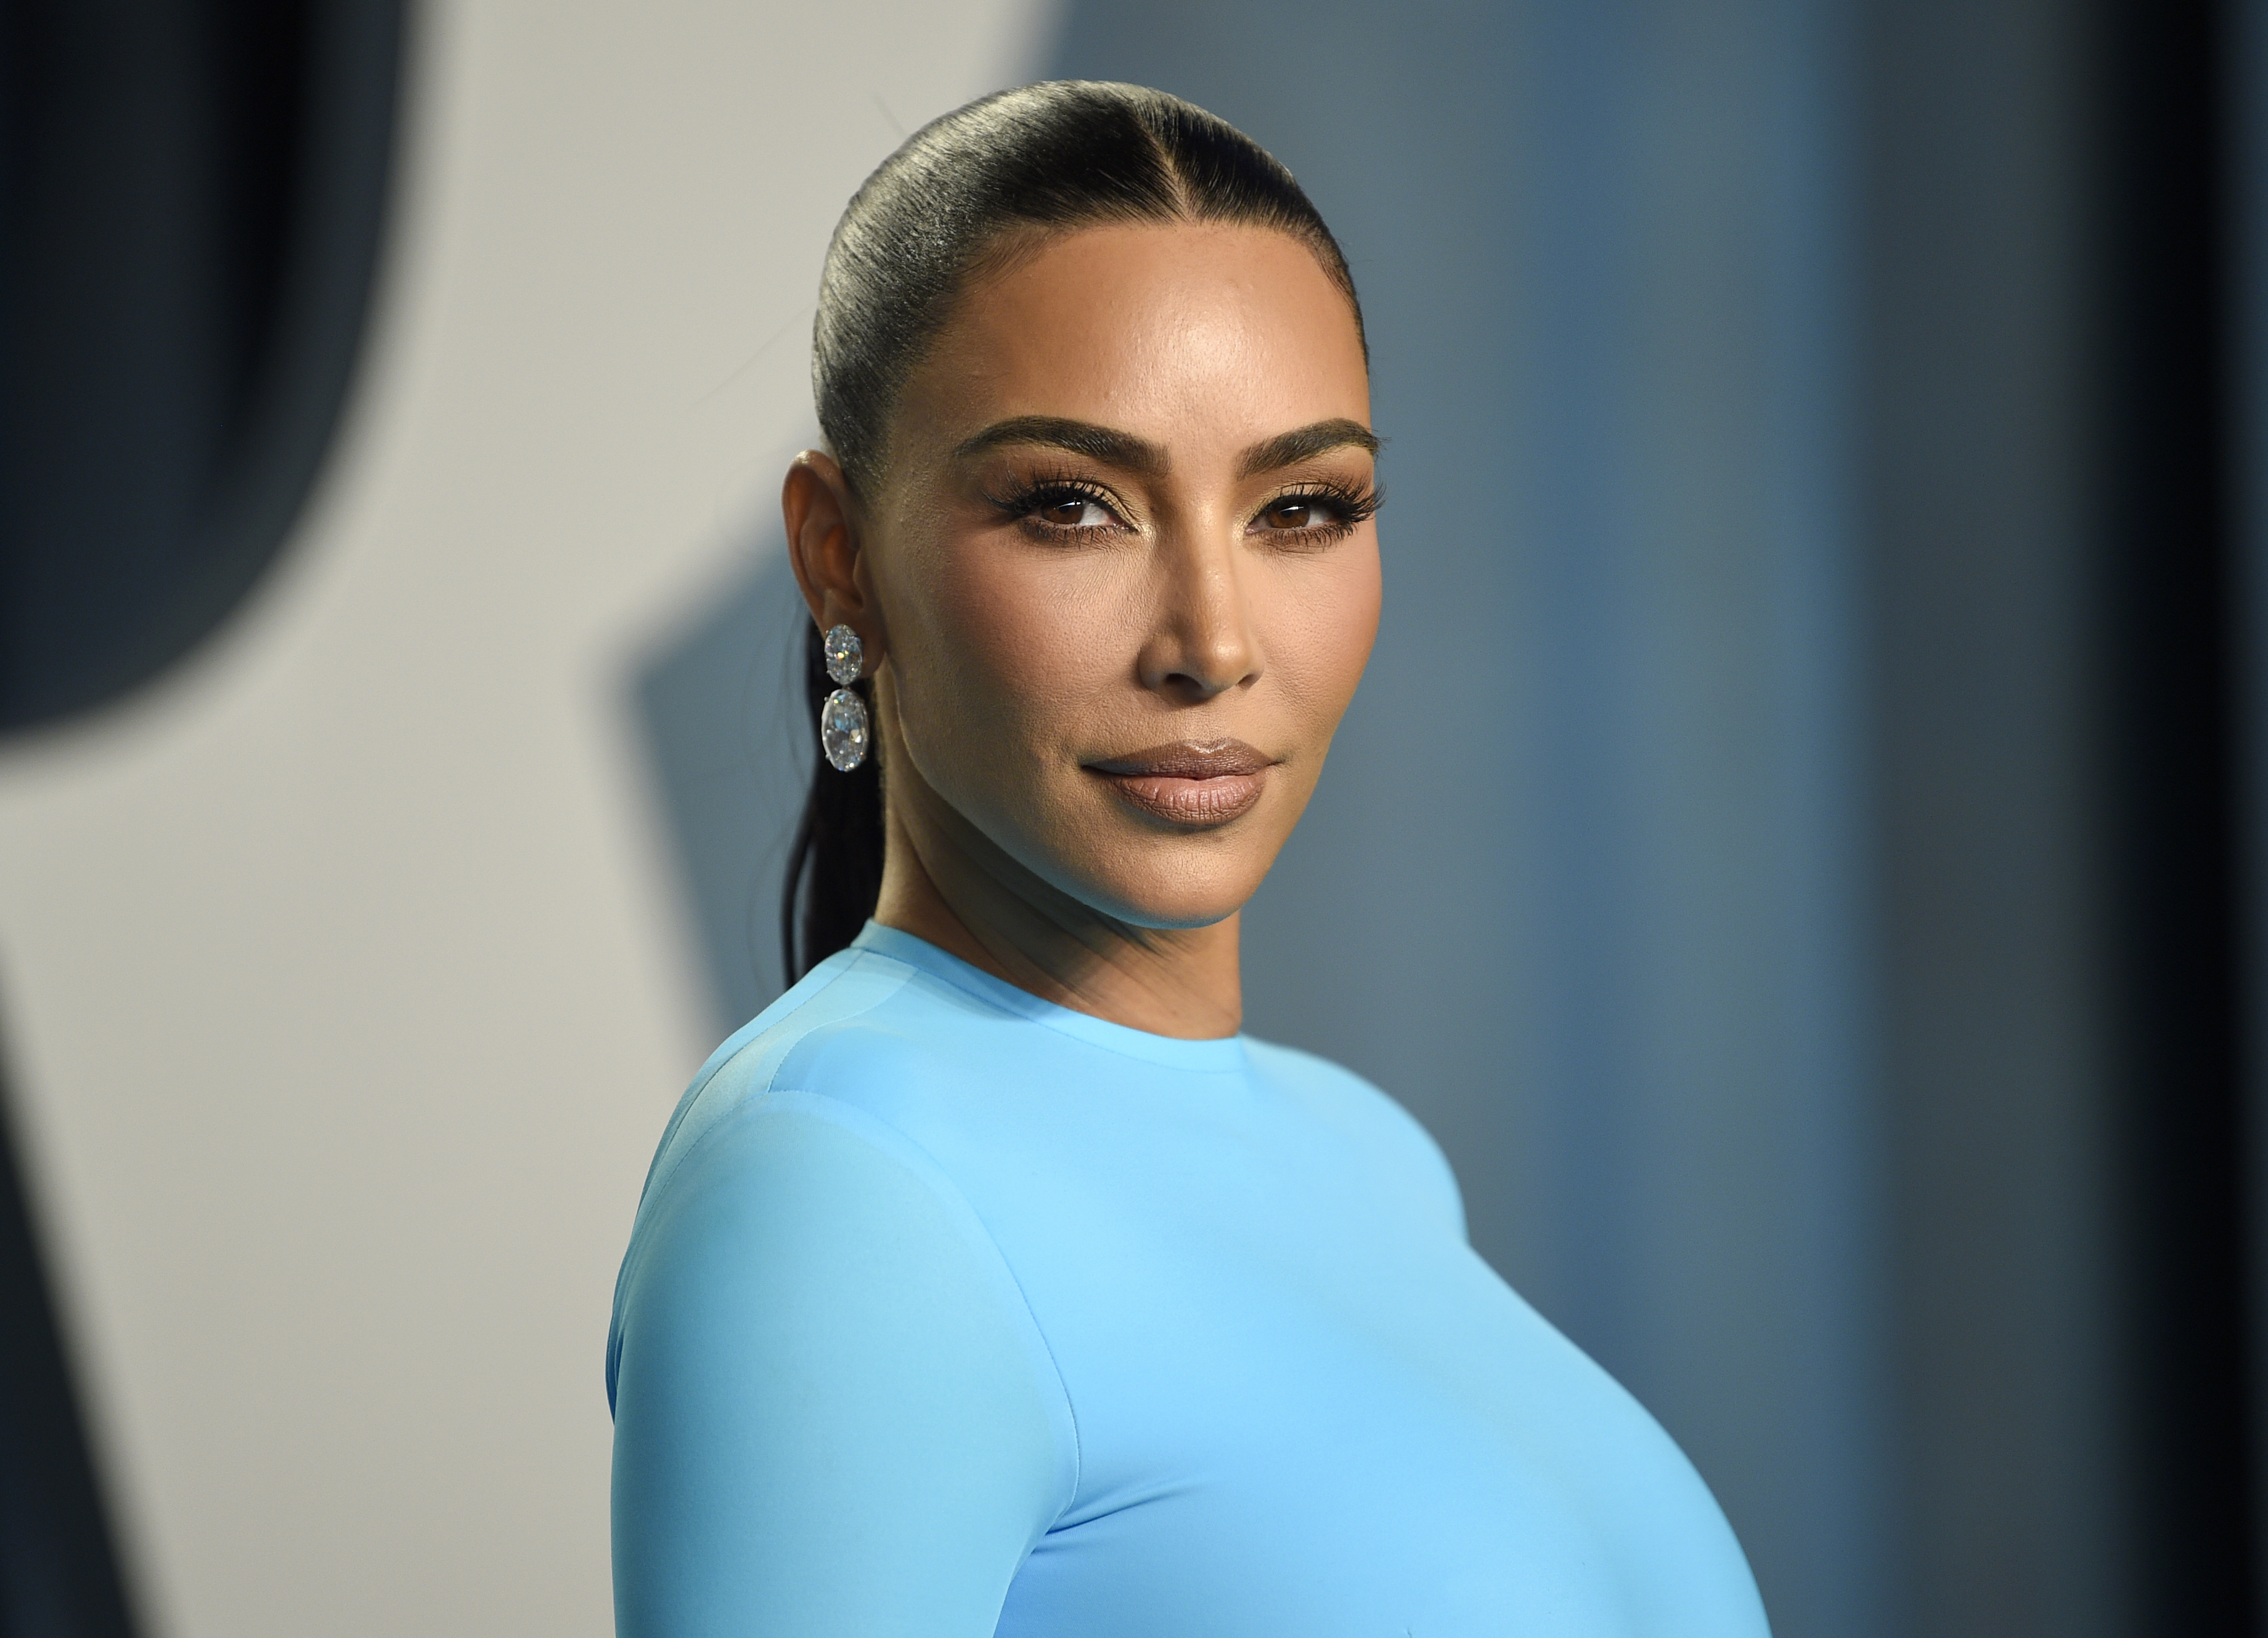 Kim Kardashian appears at the Vanity Fair Oscar Party in Beverly Hills, Calif., on March 27, 2022. (Evan Agostini/Invision/AP, File)